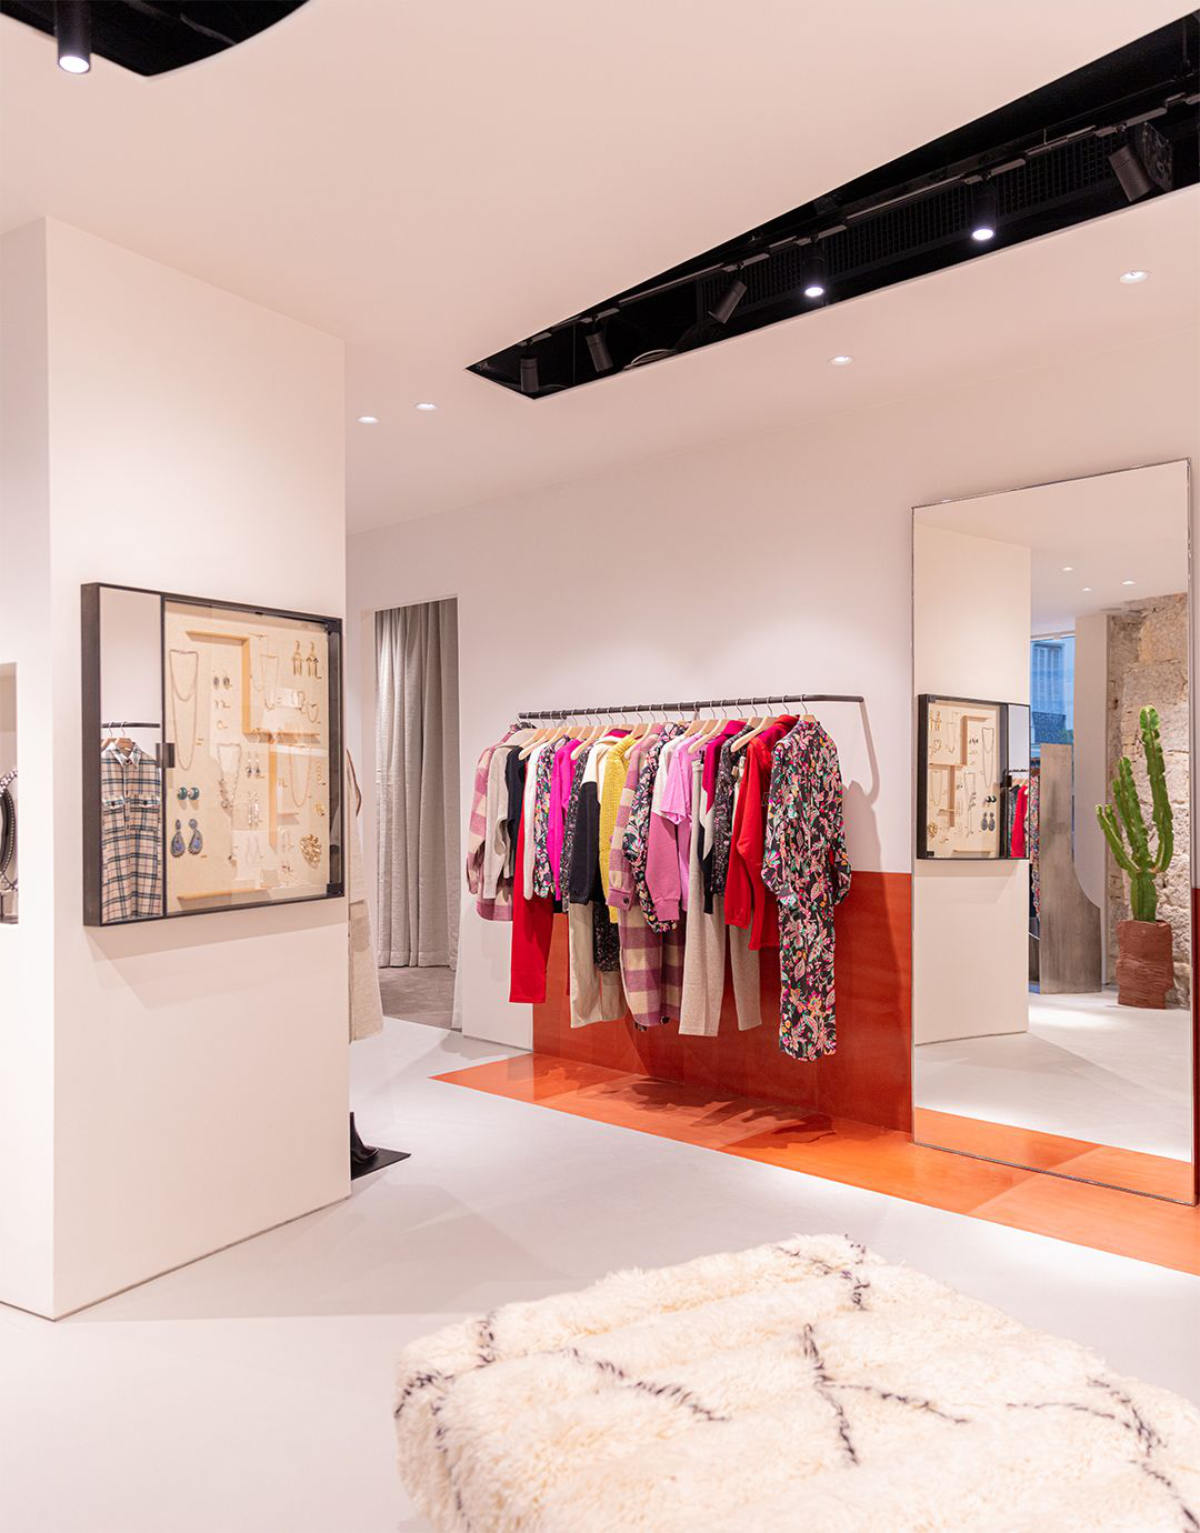 Isabel Marant Opend Her First Store In Nice, France